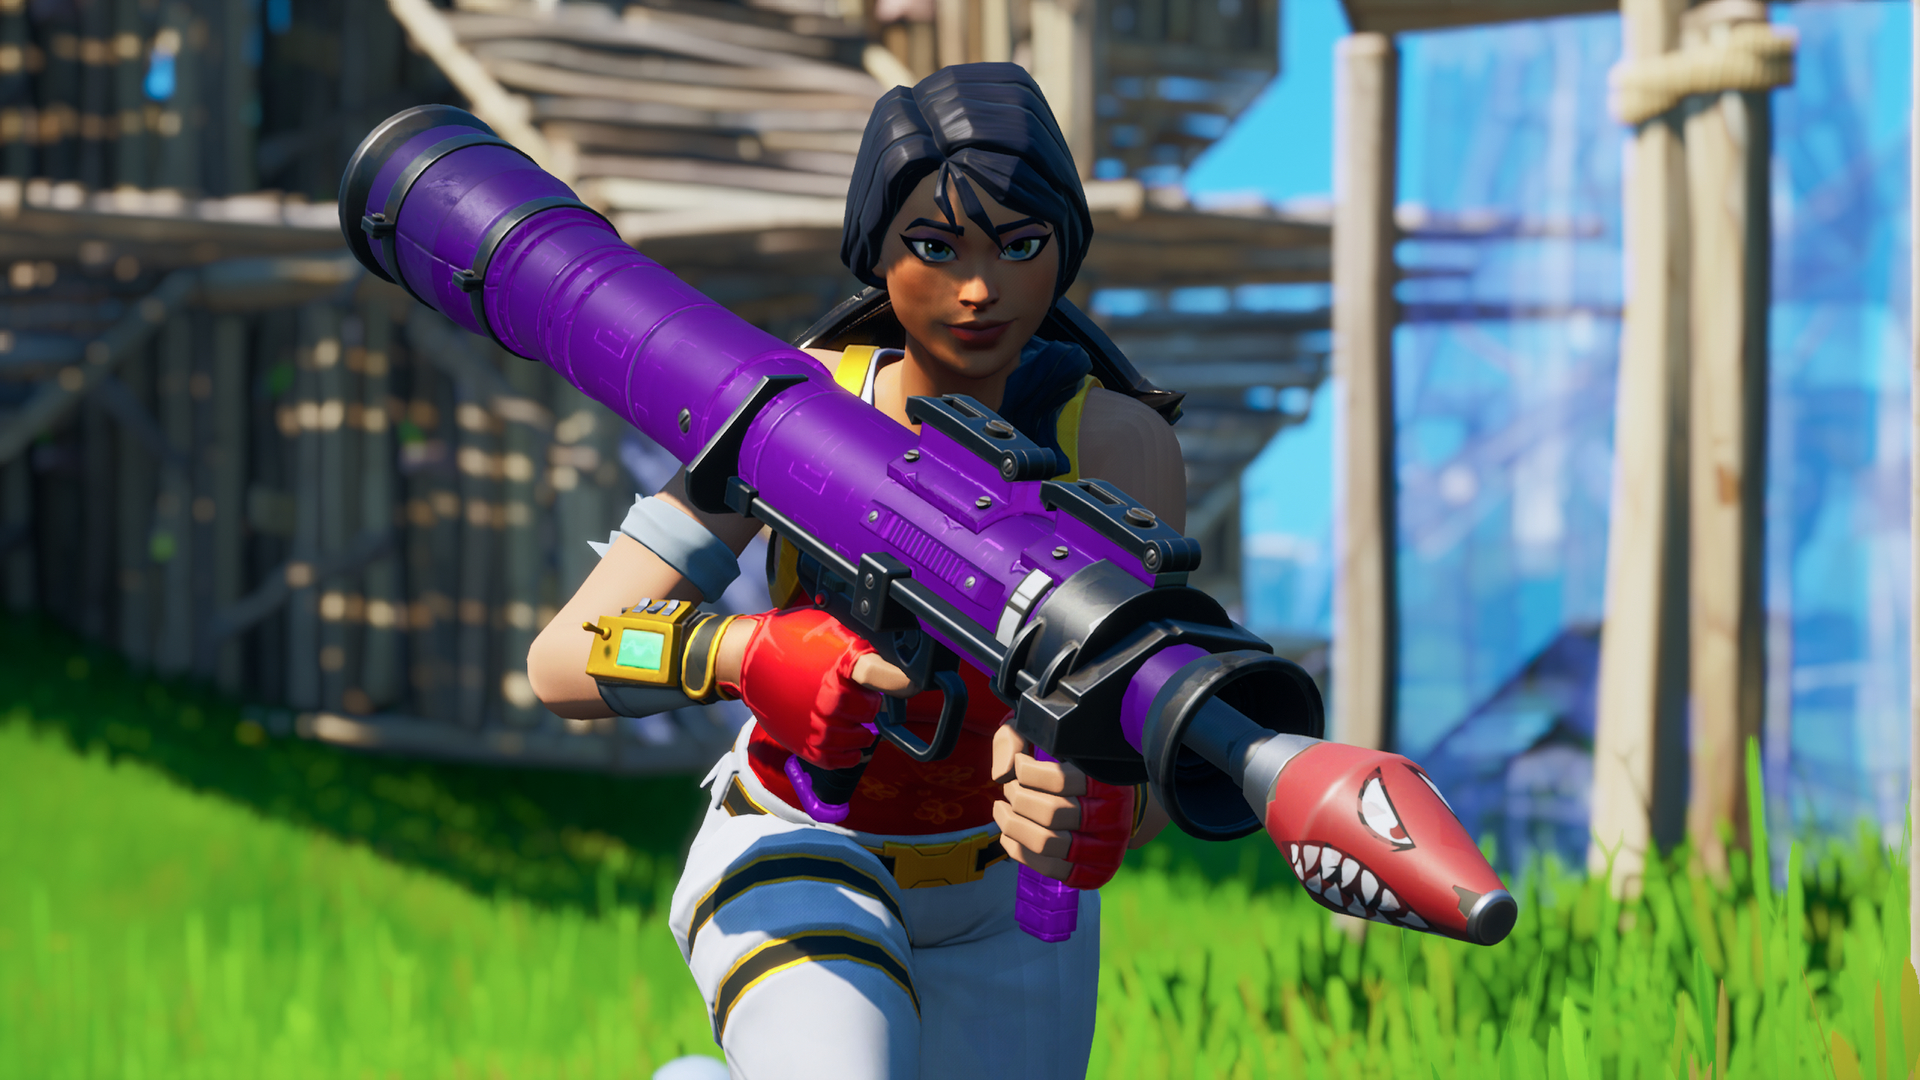 Epic Games asks Apple to reinstate Fortnite in South Korea after new law